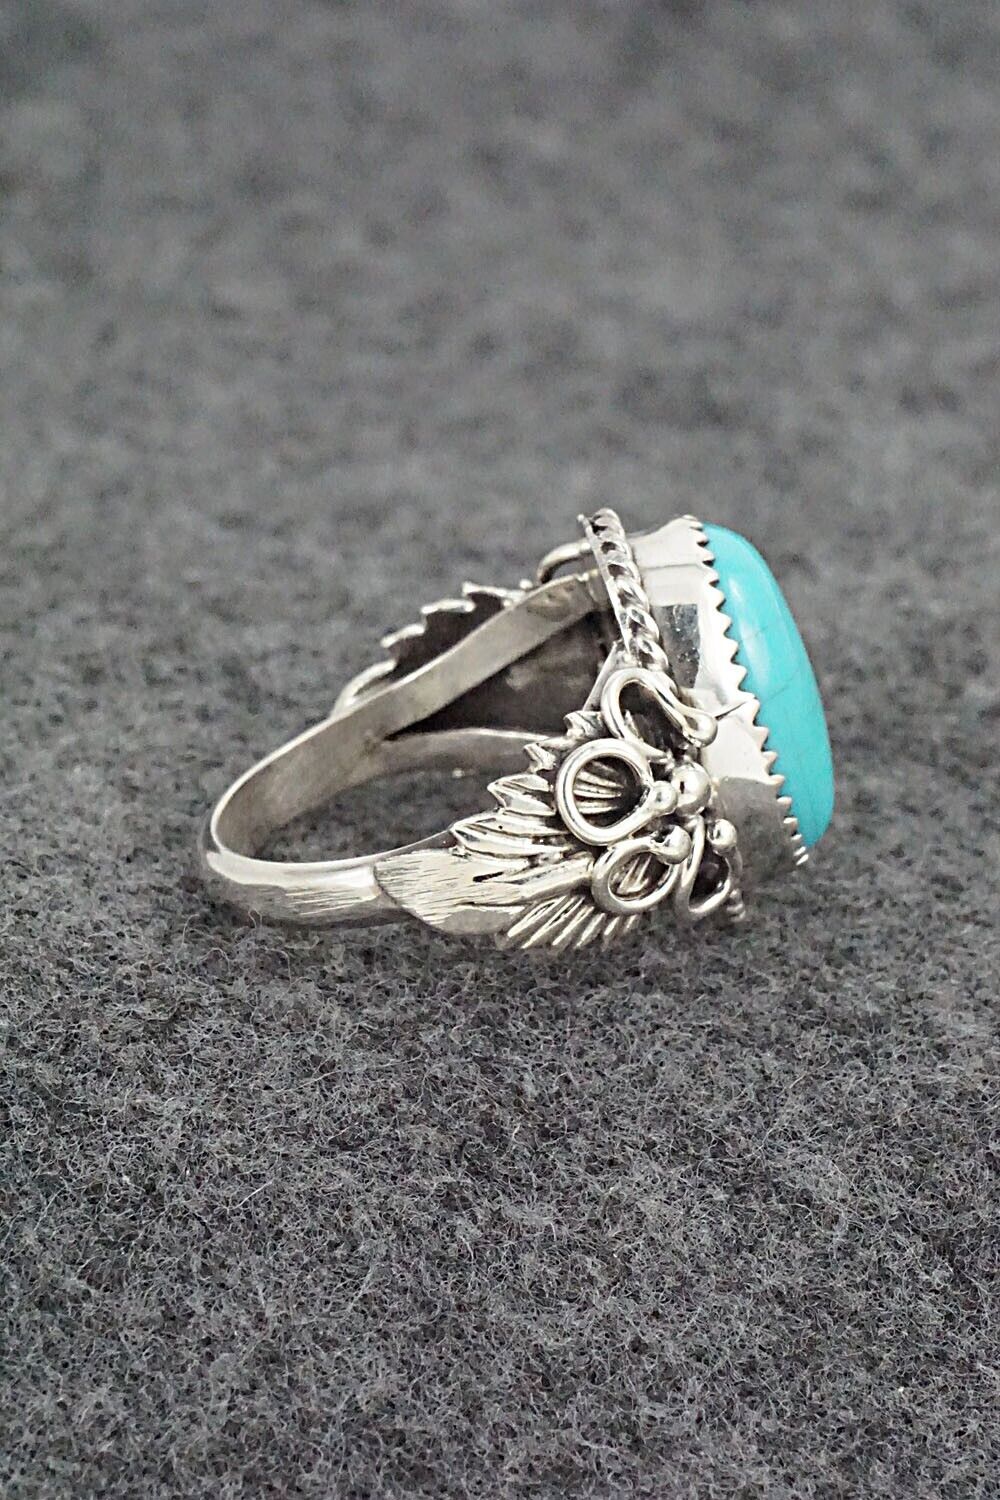 Turquoise & Sterling Silver Ring - Jeannette Saunders - Size 9.5